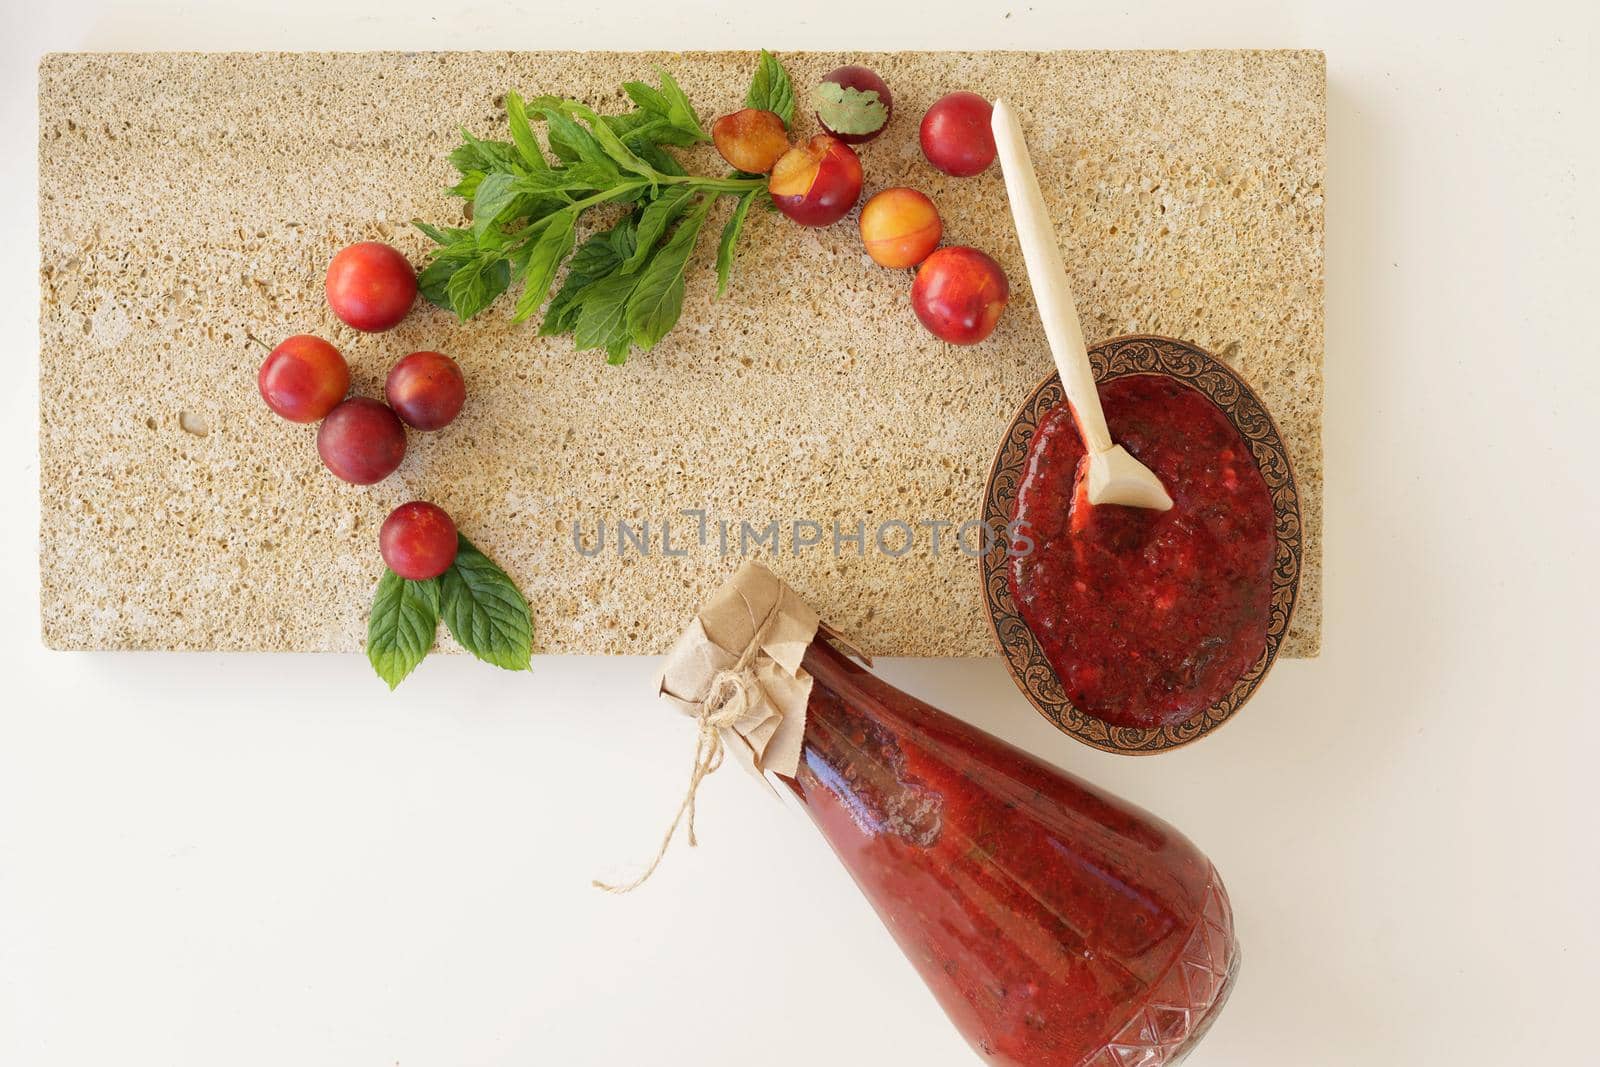 Georgian tkemali sauce in a glass bottle with ingredients on natural stone background